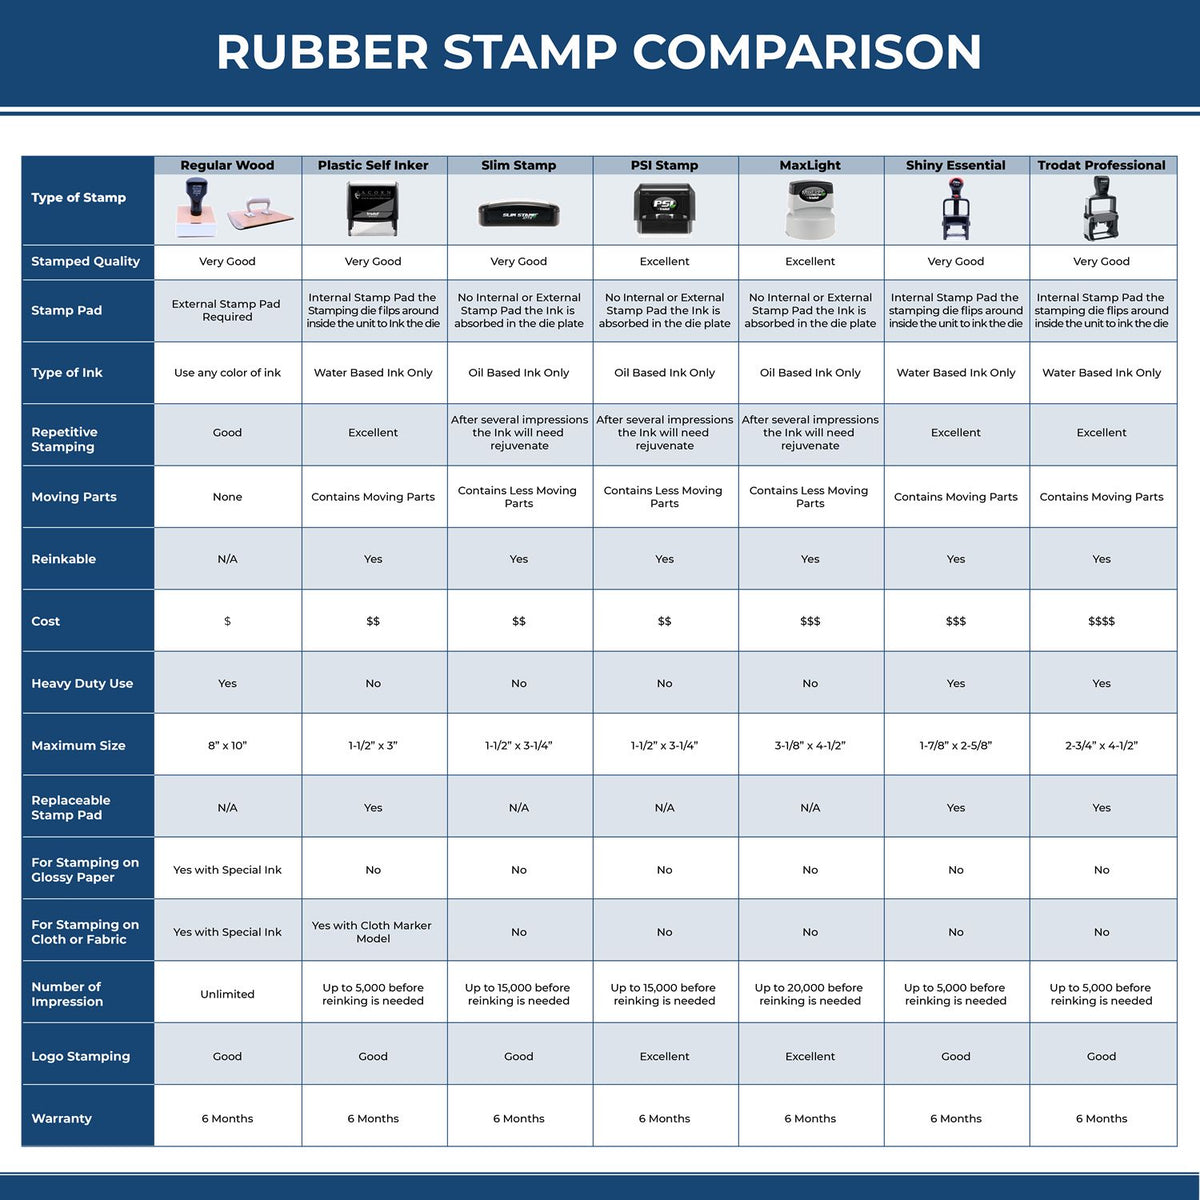 A comparison chart for the different types of mount models available for the MaxLight Premium Pre-Inked Oklahoma State Seal Notarial Stamp.